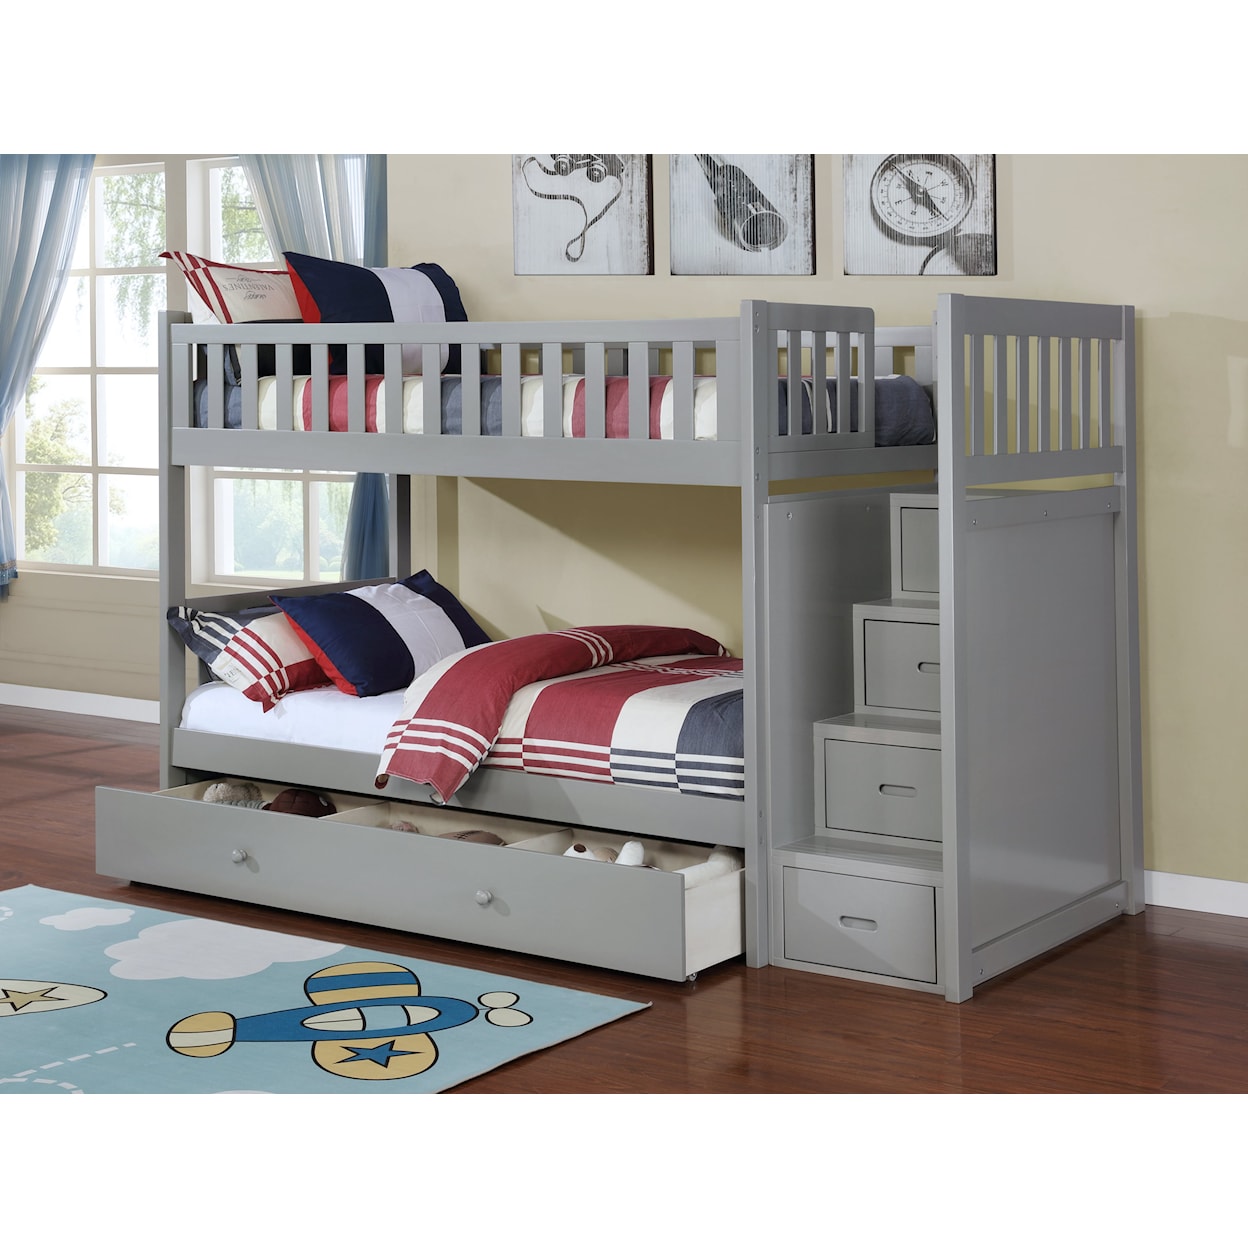 Alex's Furniture B802G Casual Twin Over Twin Bunk Bed